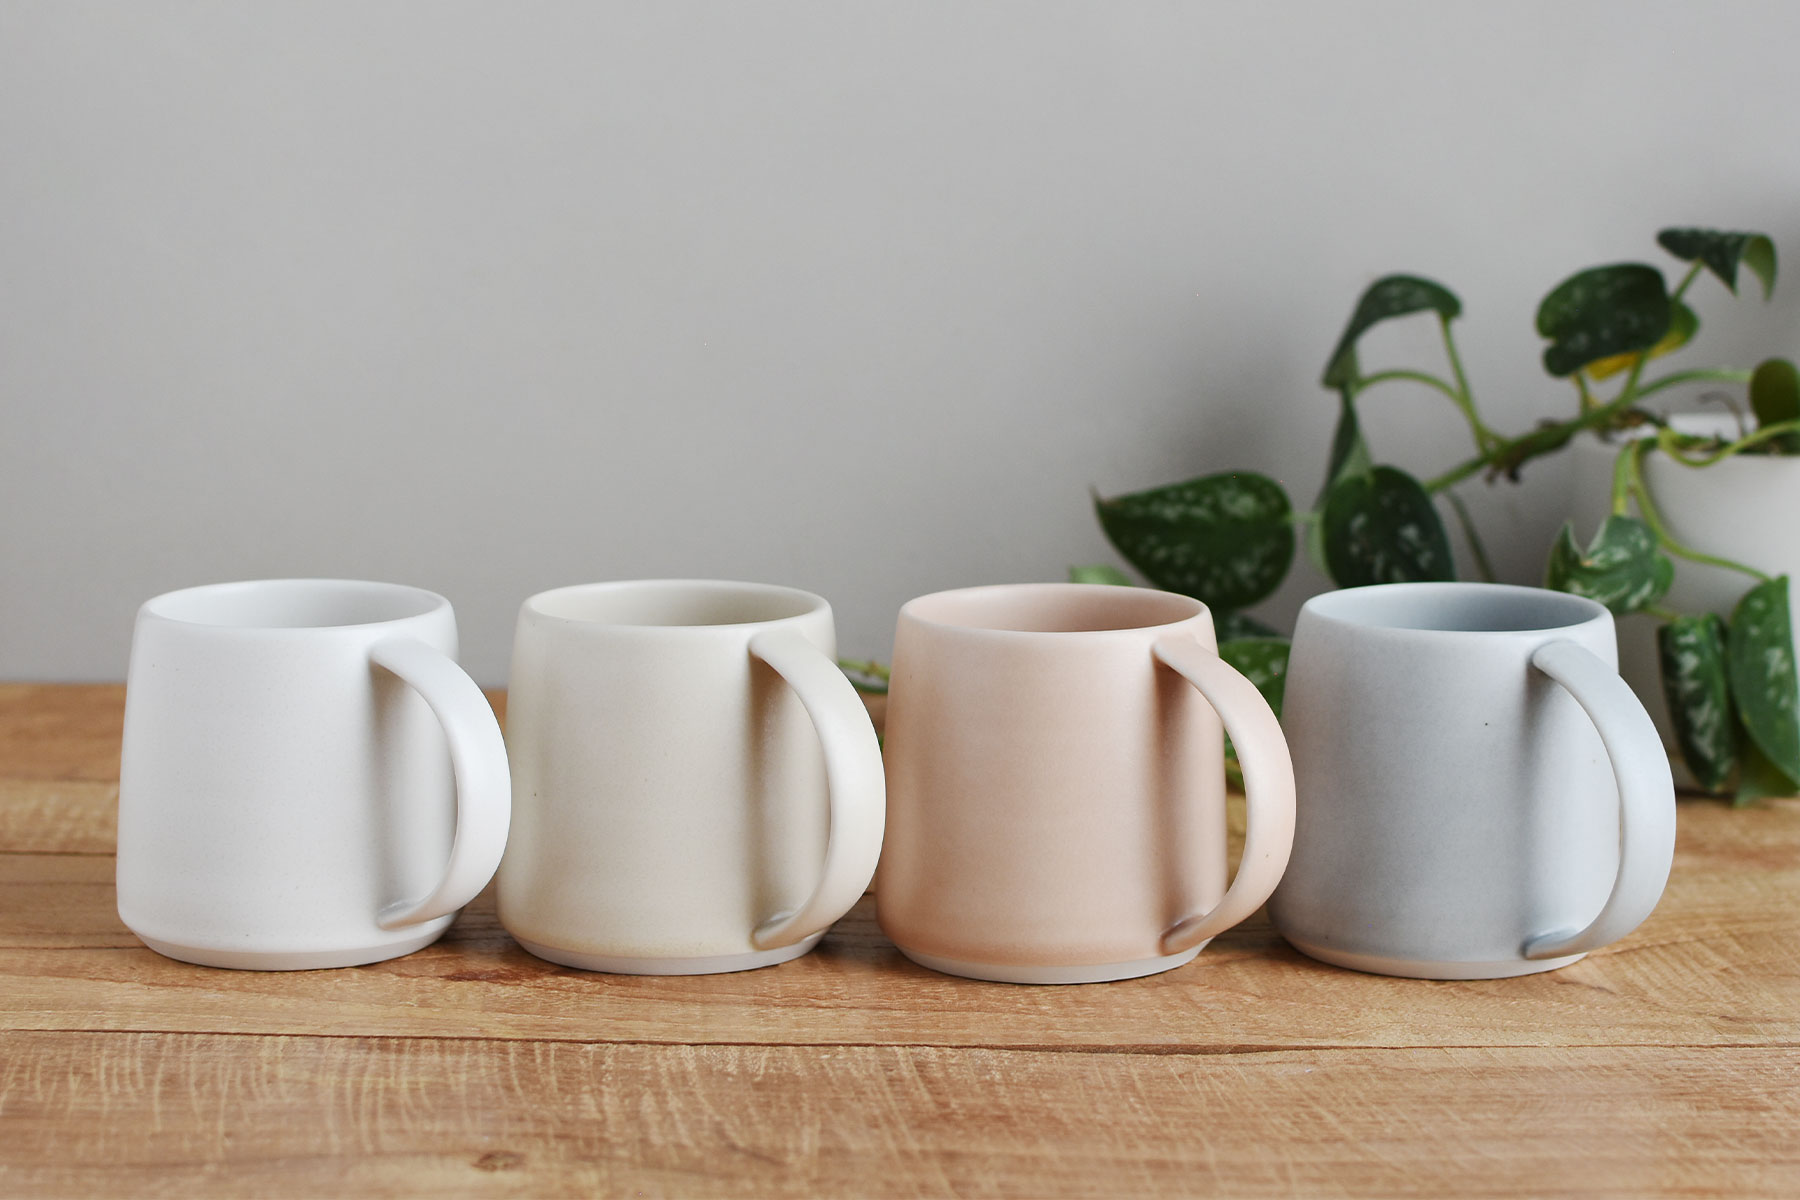  RIPPLE mug collection in beige, pink, gray, white 